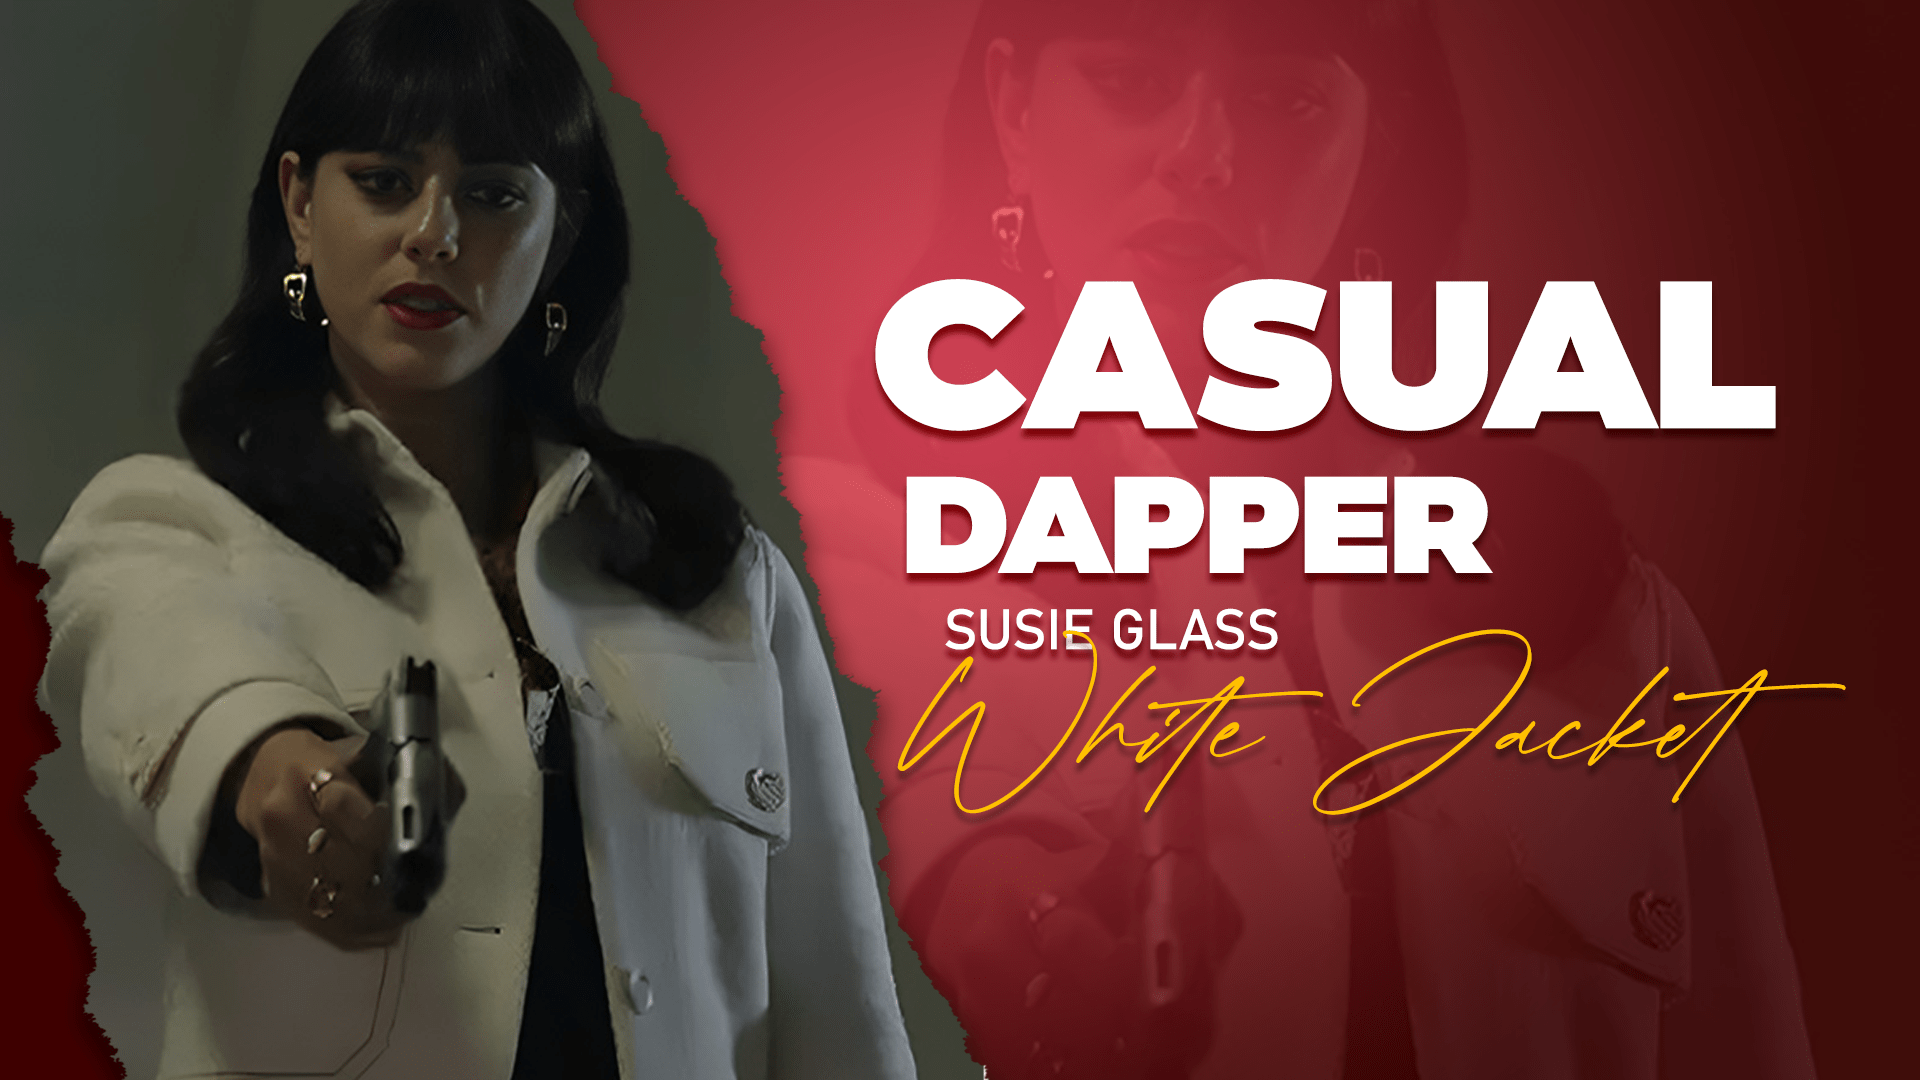 Casually DapperSusie Glass White Jacket-min